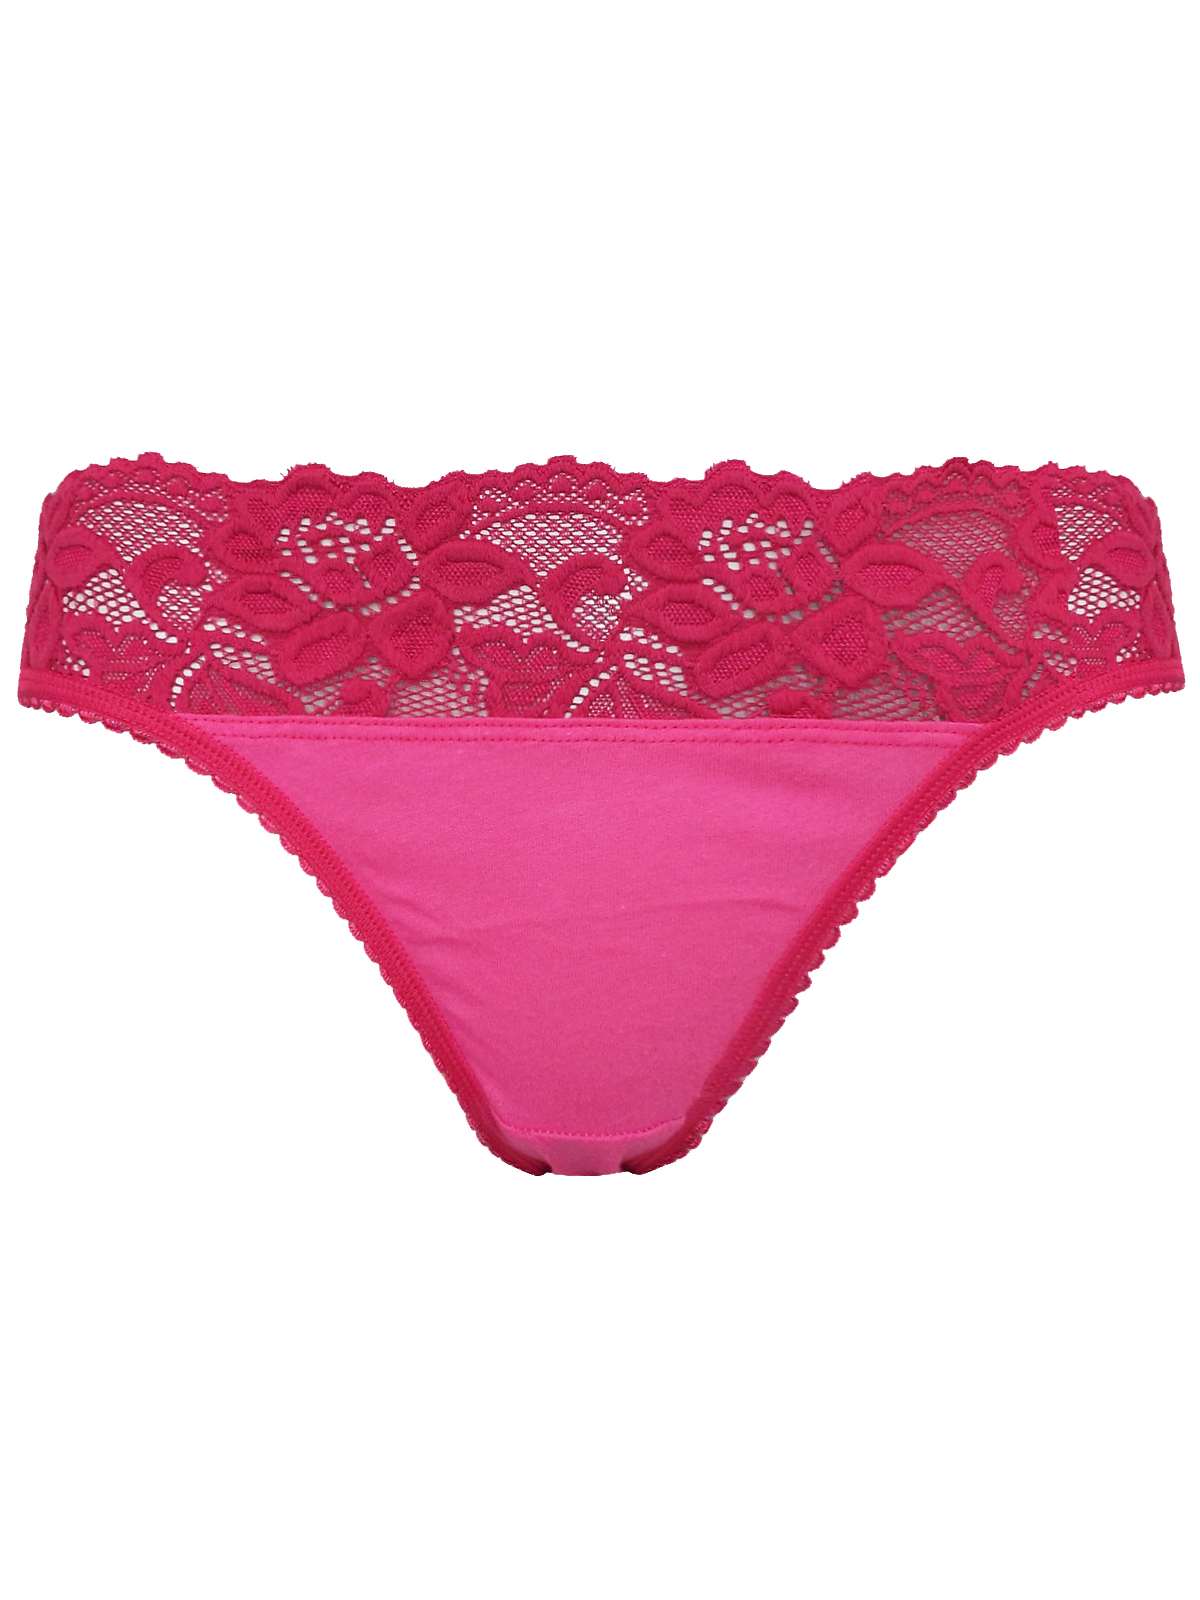 Marks and Spencer - - M&5 ROSE 5-Pack Lace High Leg Knickers - Size 10 ...